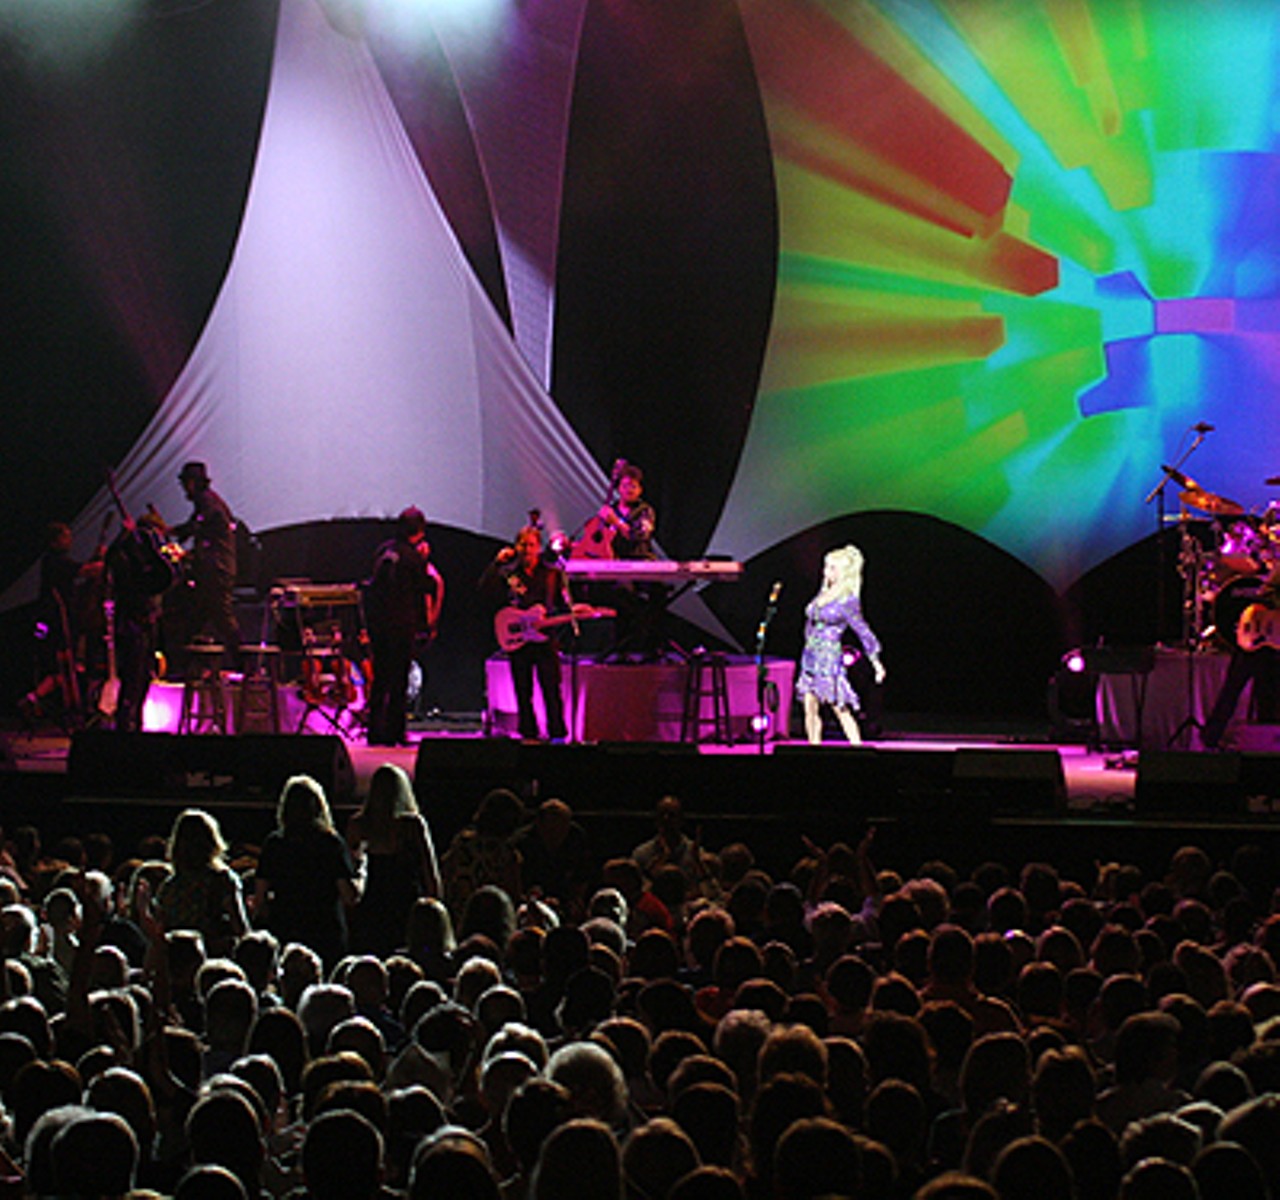 Dolly reaches to the converted during her performance on August 14, 2008 at the Fabulous Fox Theatre in St. Louis. 
Read the concert review and set list.